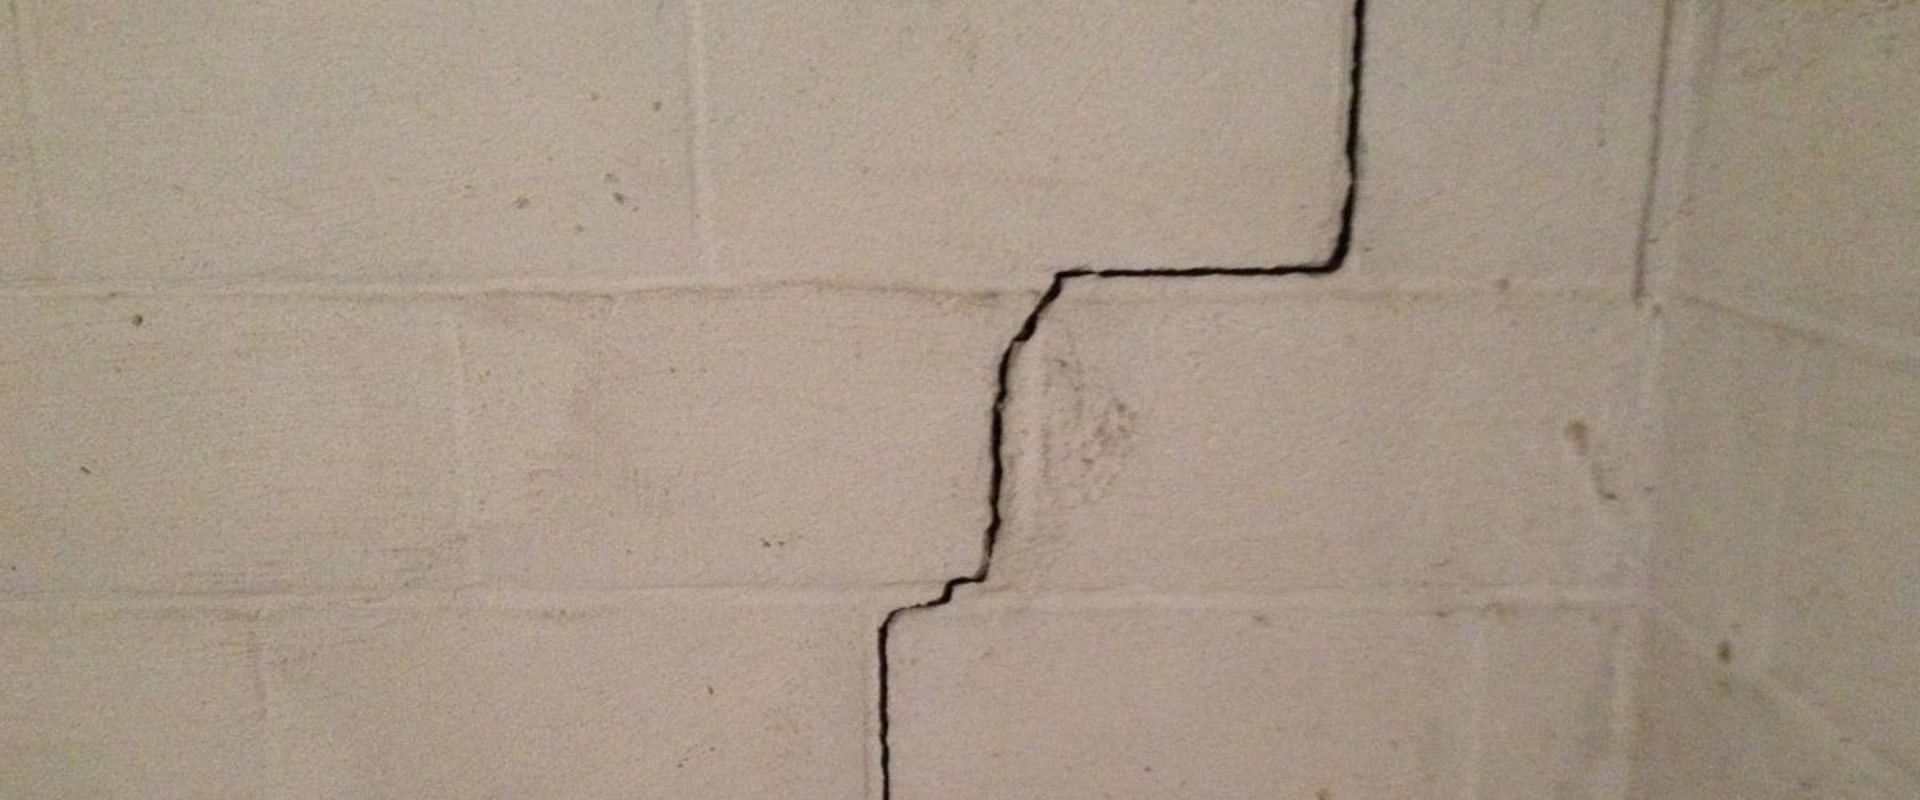 Can a cracked foundation be fixed?